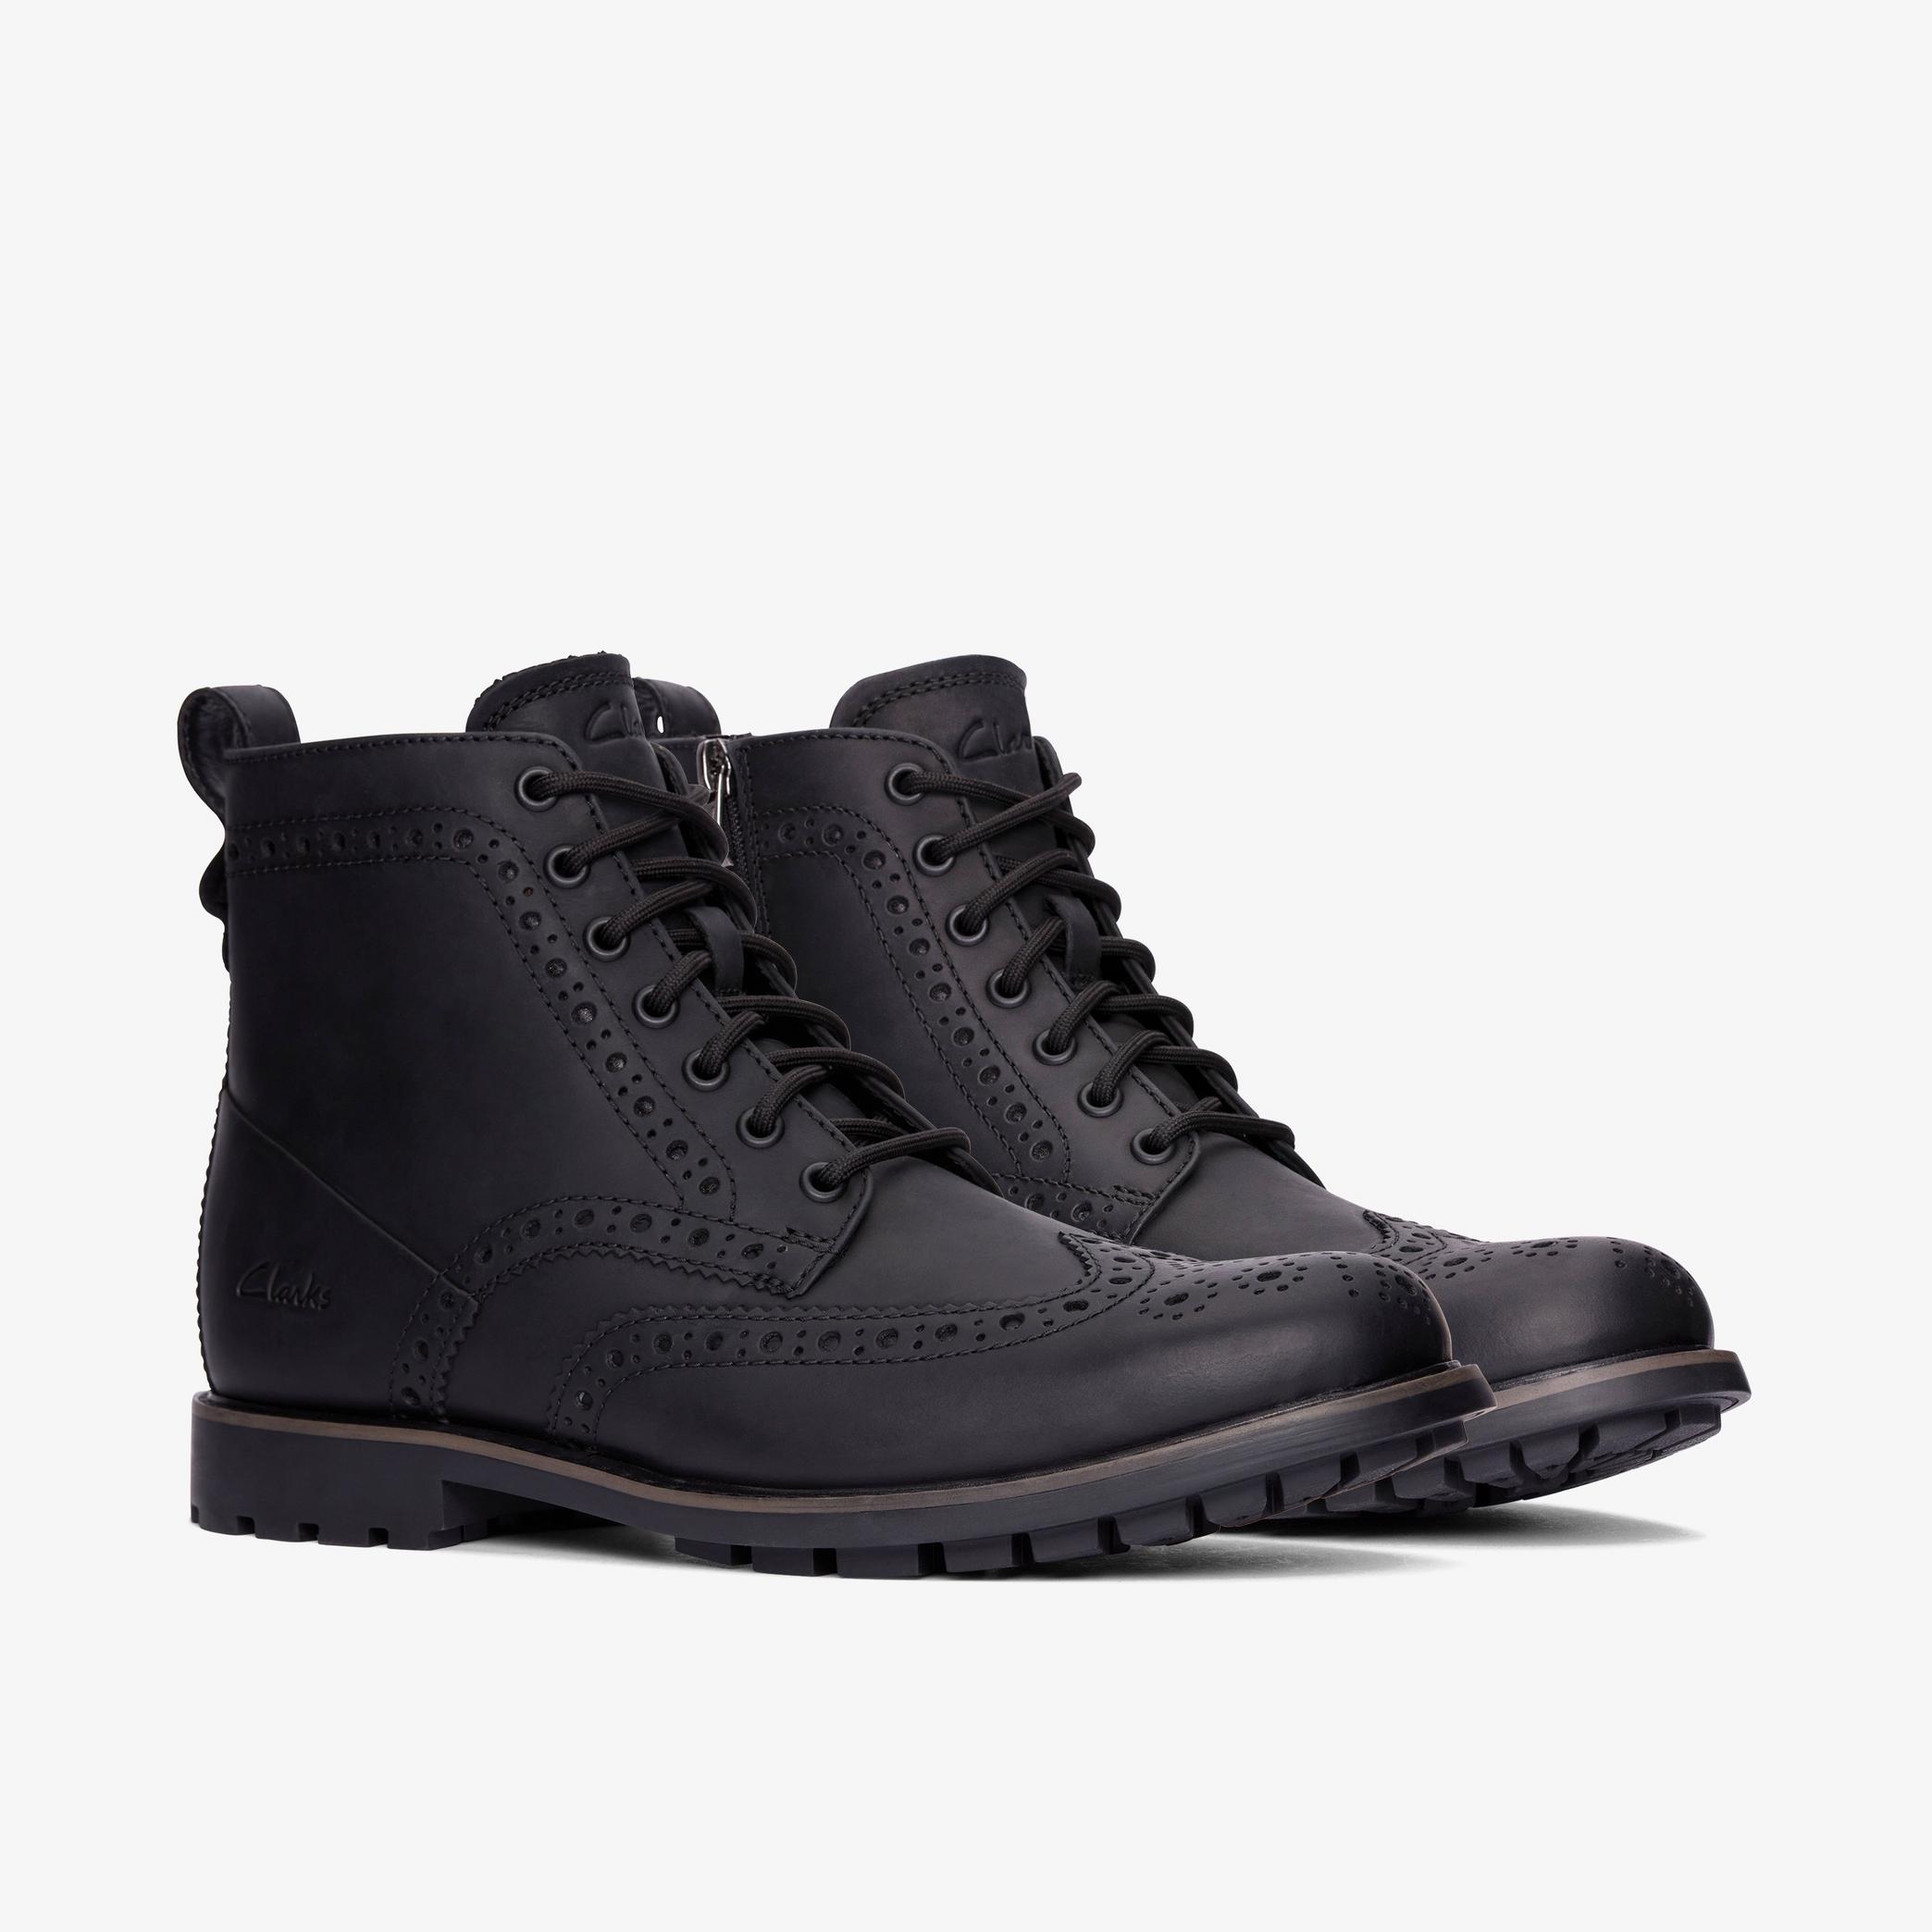 Westcombe Limit Black Warmlined Leather Ankle Boots, view 4 of 6